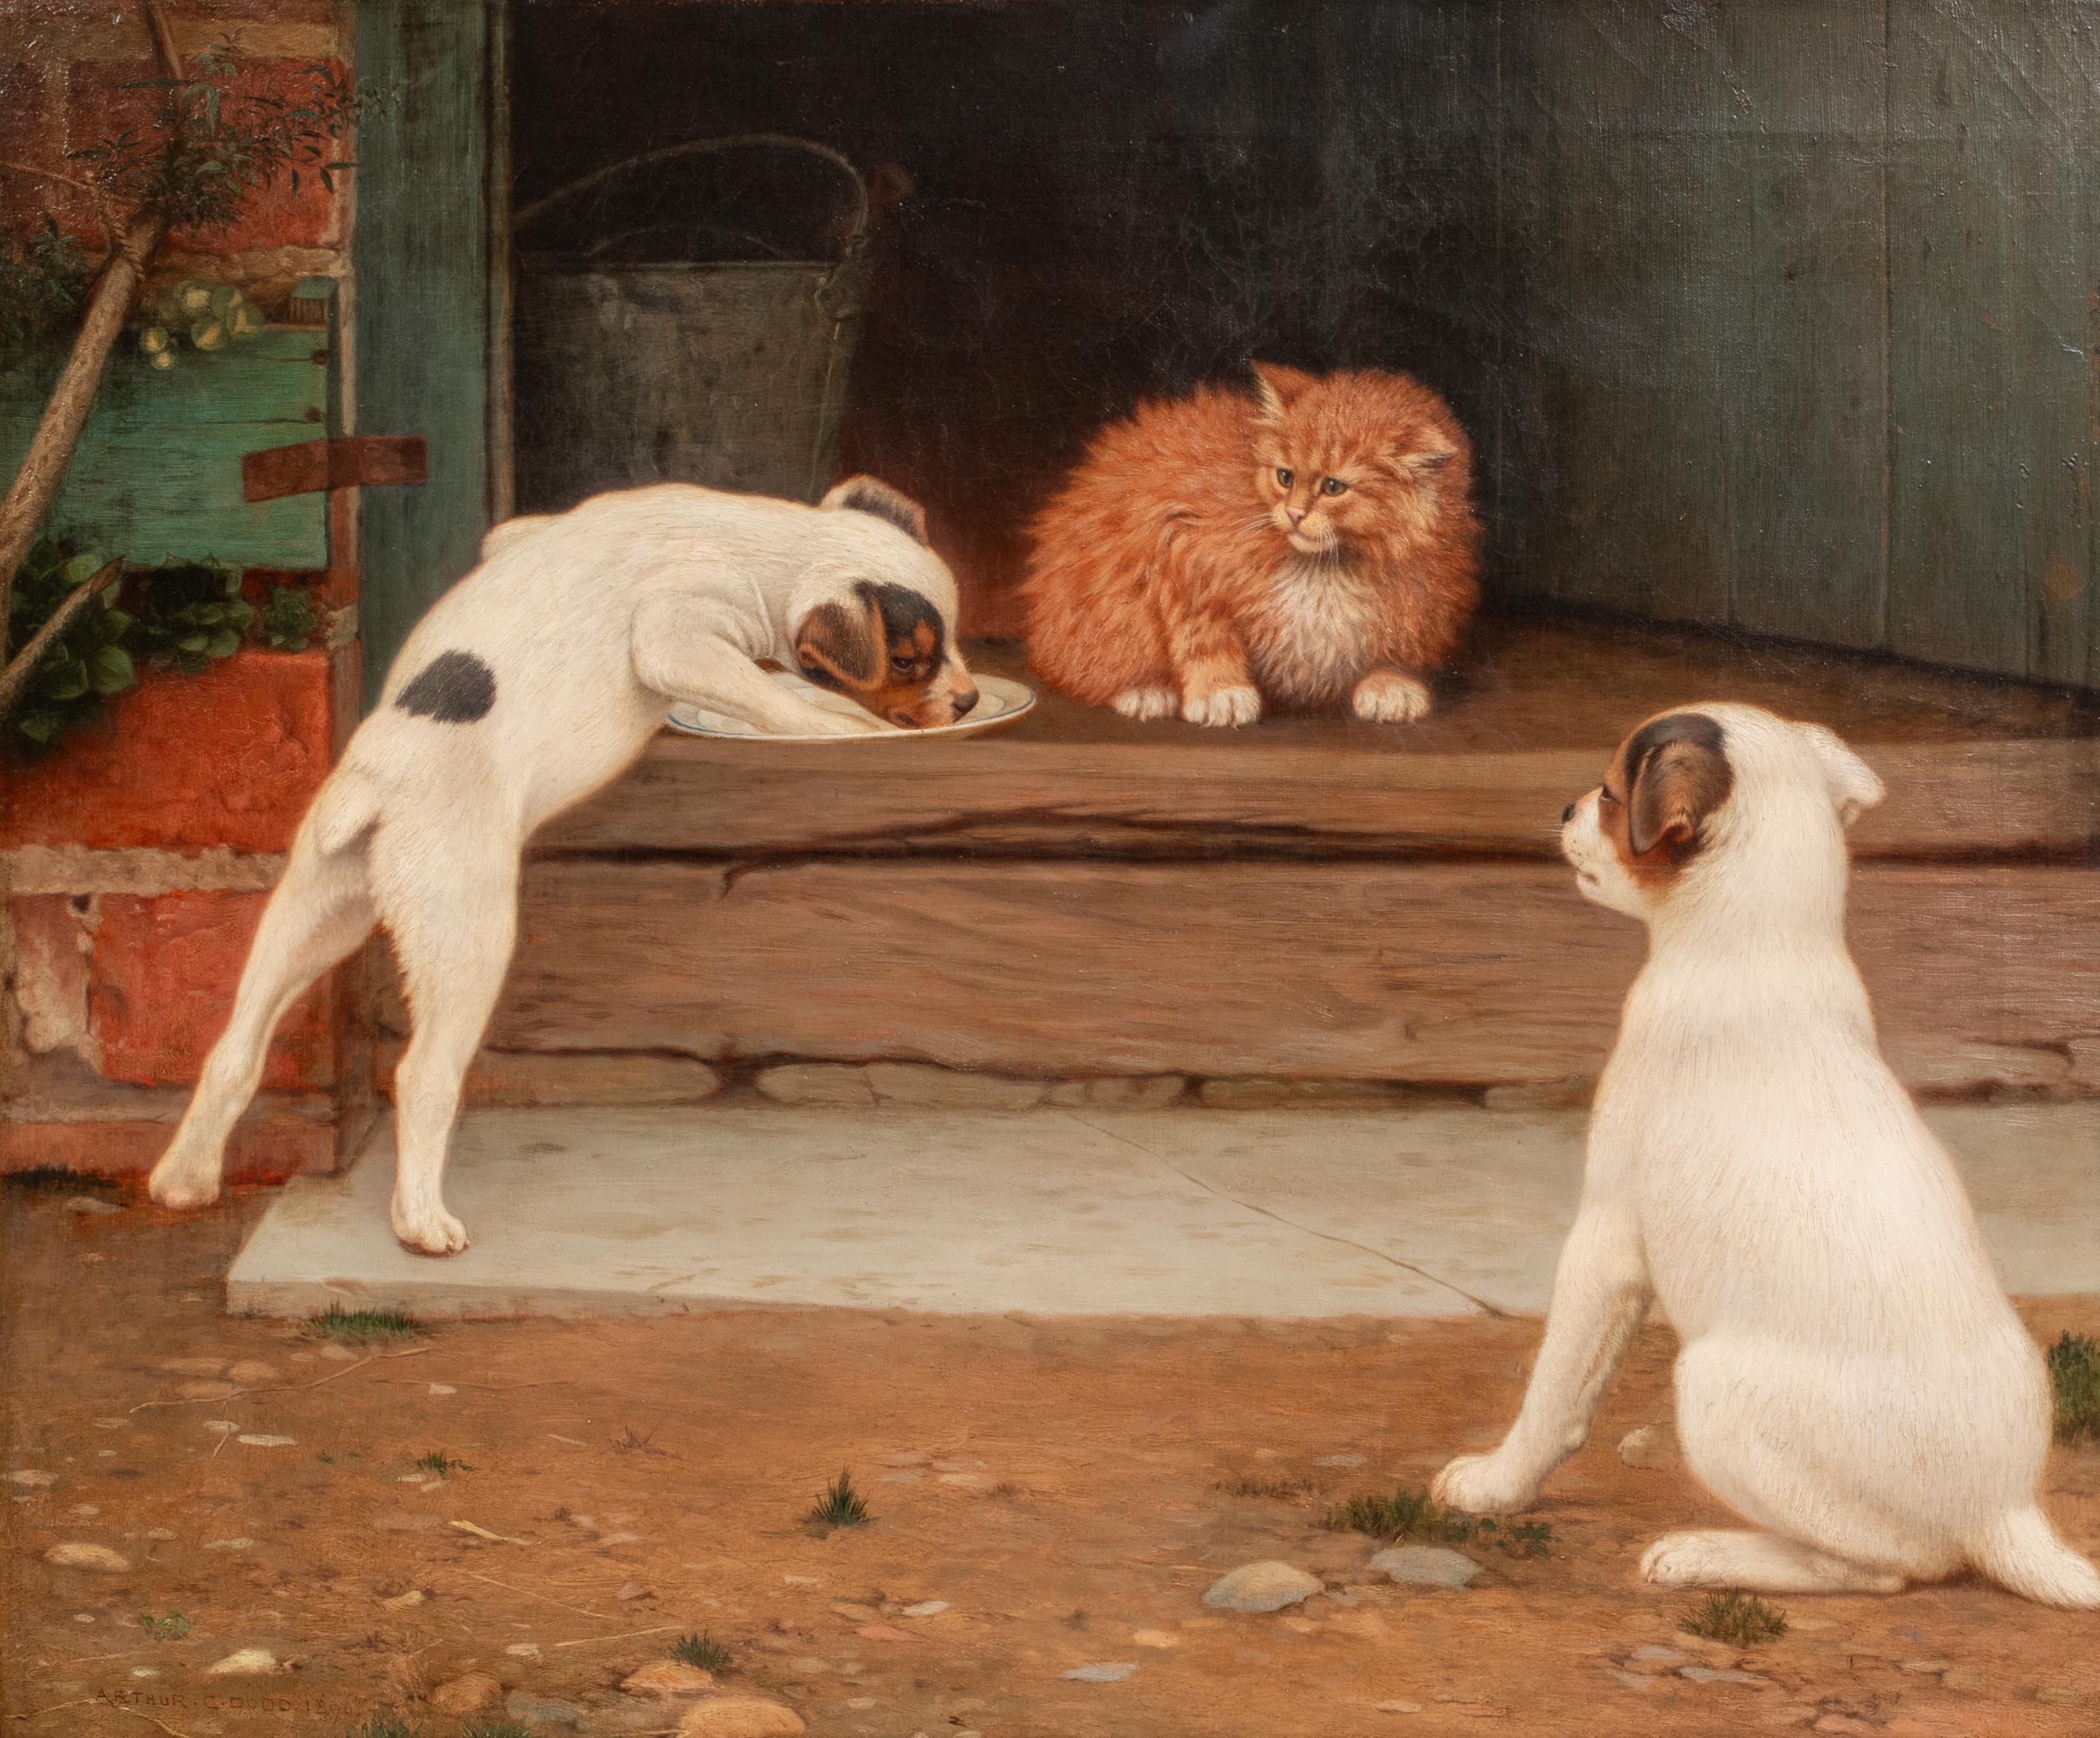 'None but the Brave Deserve the Fair', dated 1890

by Arthur Charles Dodd (1878-1891) similar to $9,000

Large 19th Century scene of Jack Russell terrier puppies and a ginger cat at the doorstep, oil on canvas by Arthur Charles Dodd. Leading example